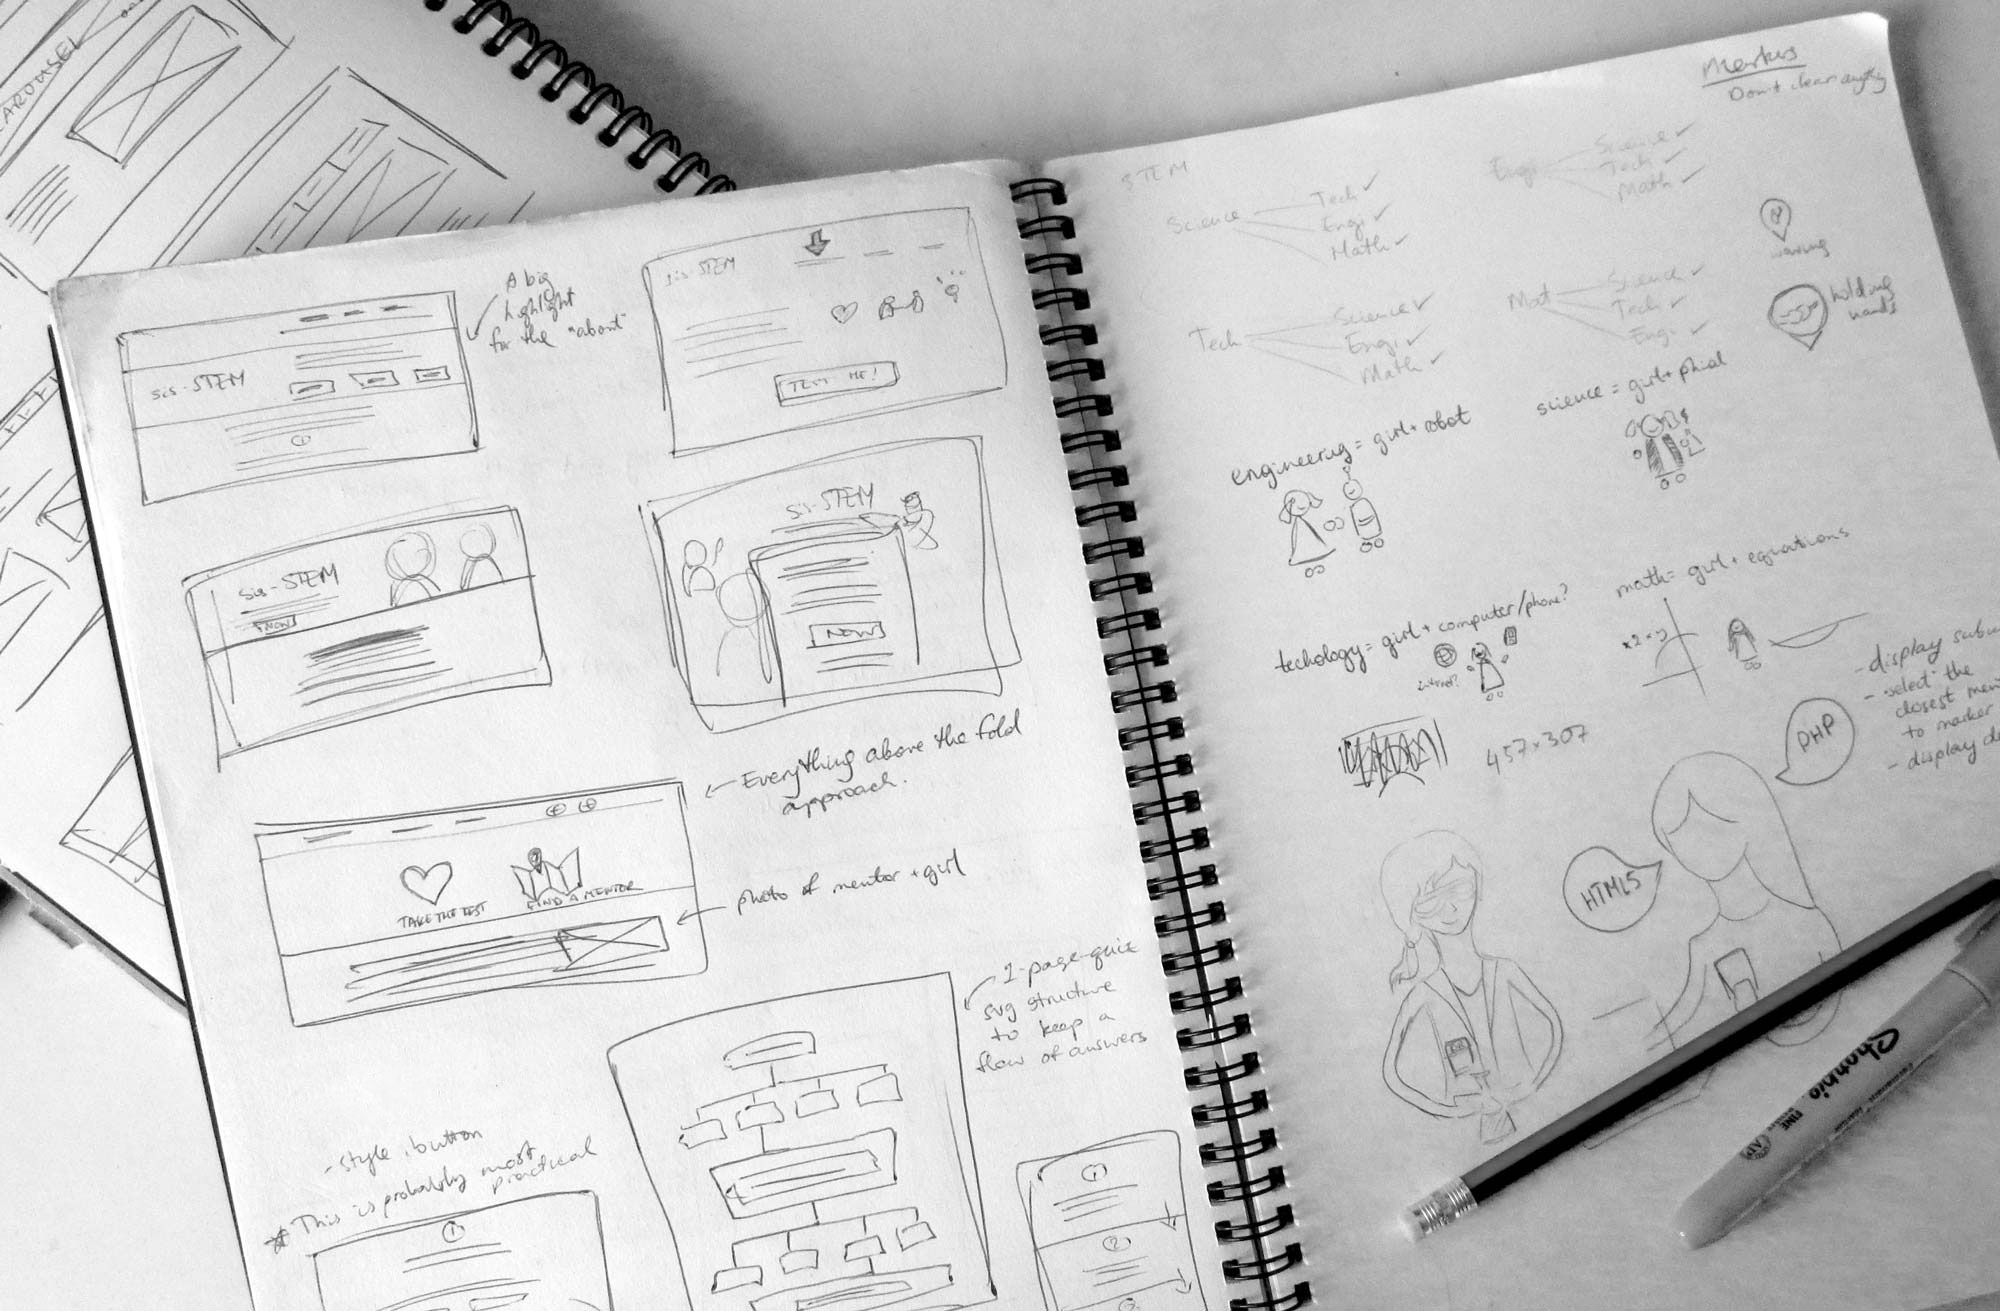 Thumbnails and wireframes for website.